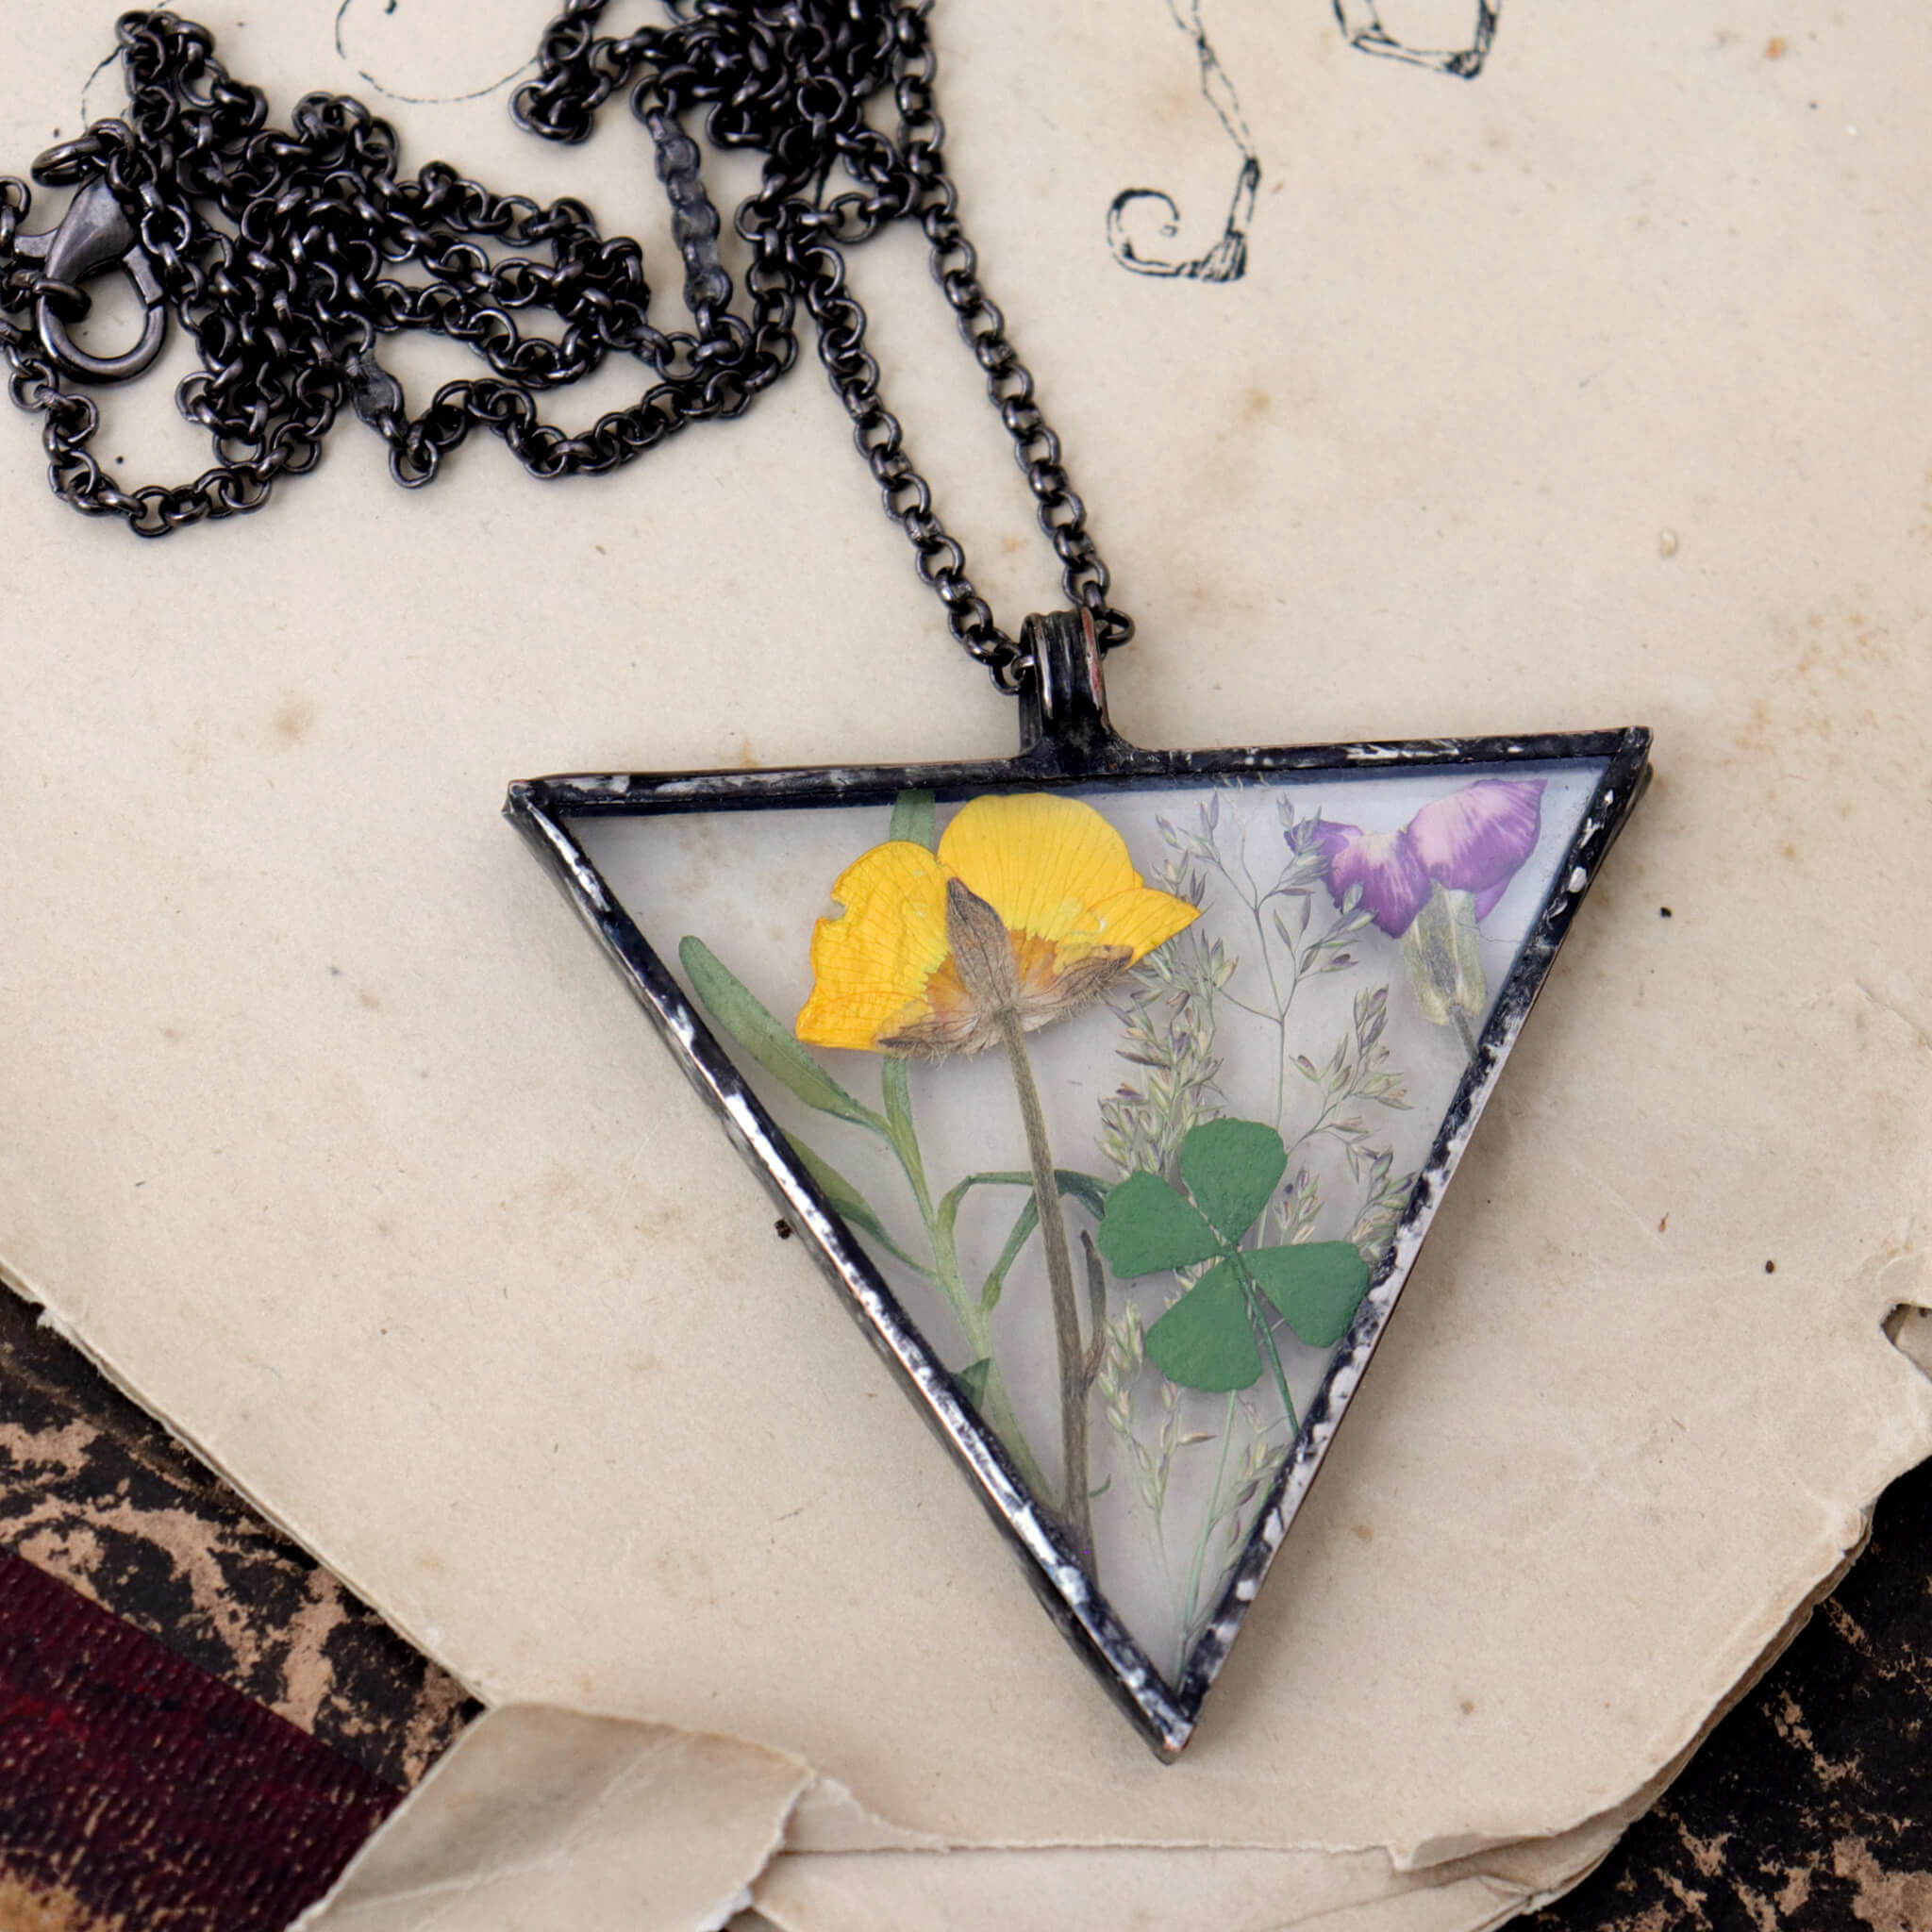 Triangular yellow and green pressed flowers necklace lying on a vintage book